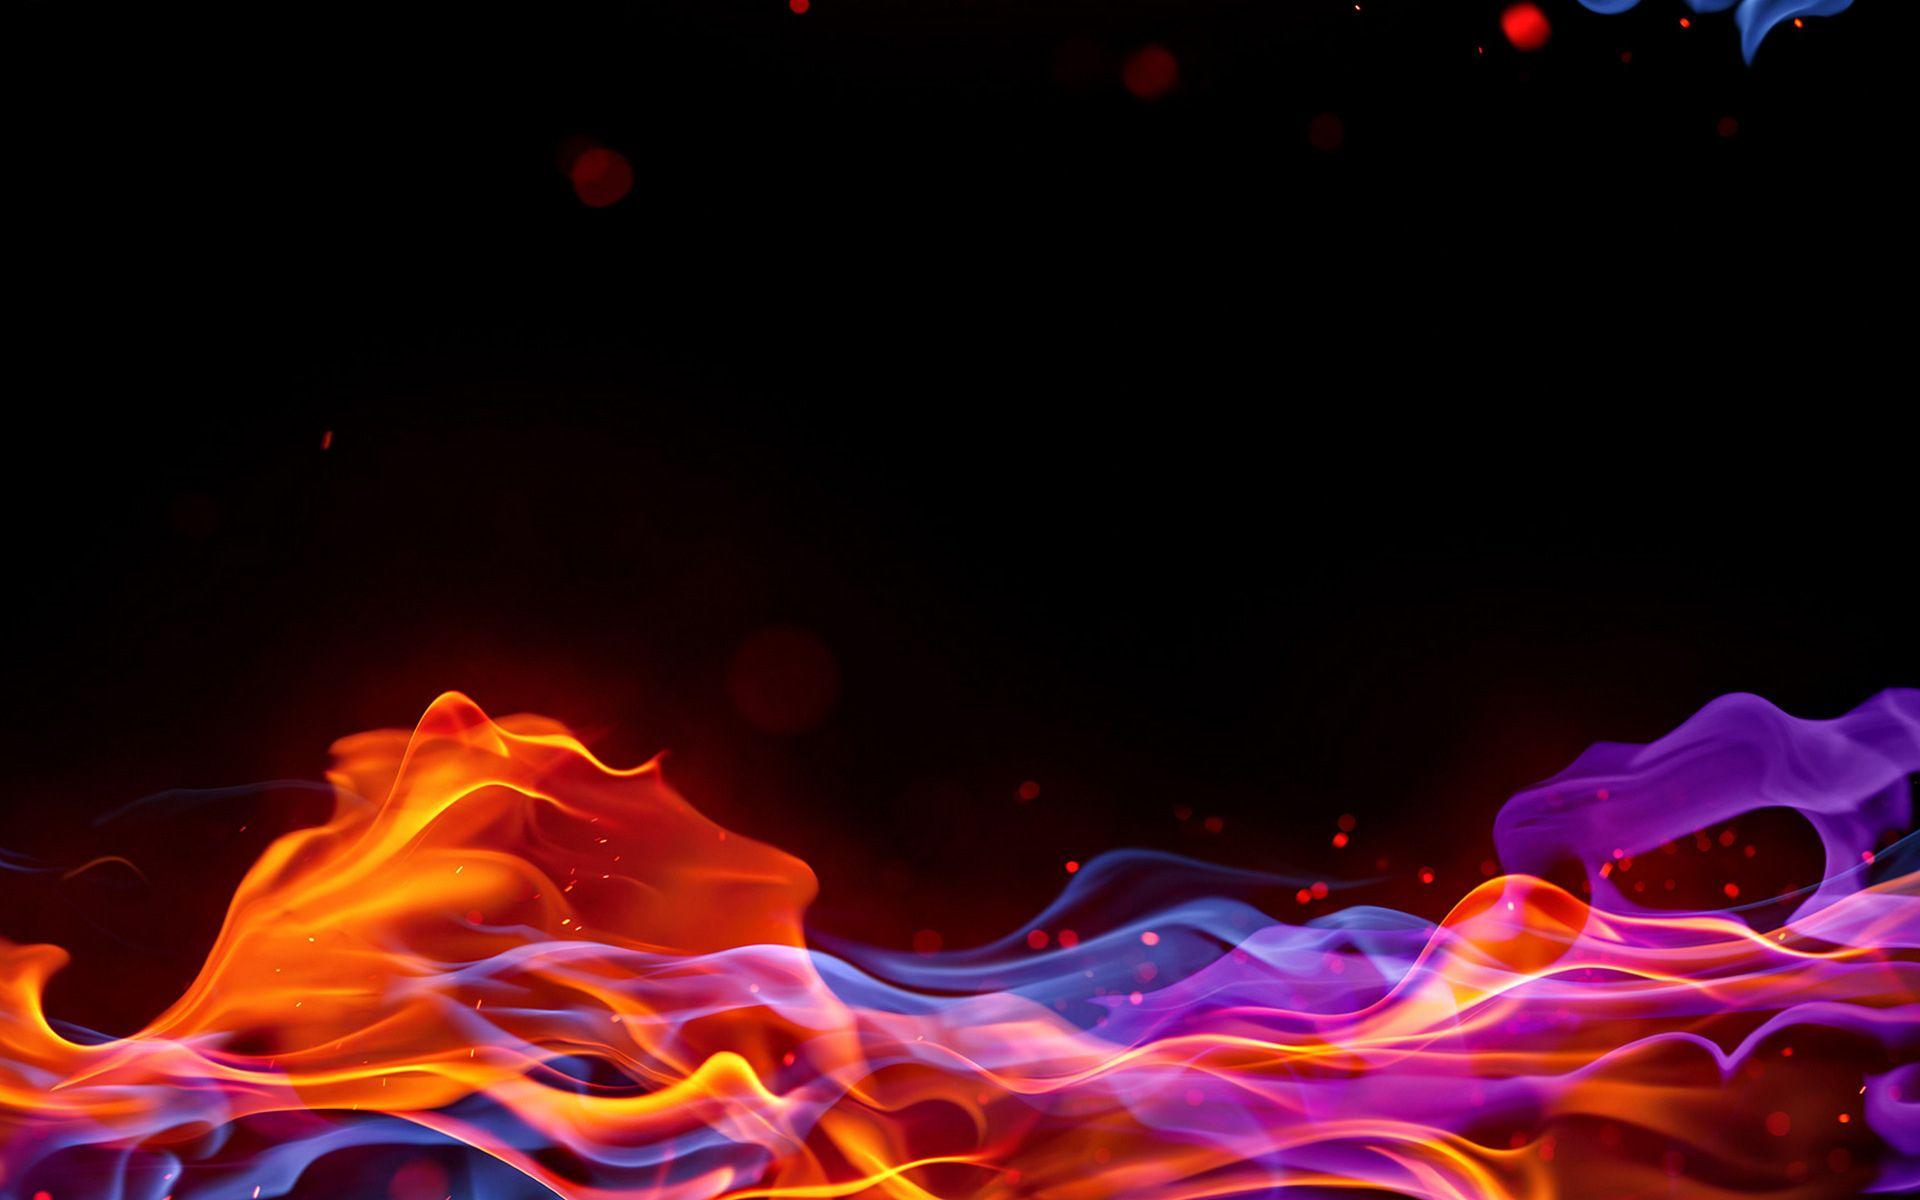 Abstract Colorful Fire Wallpaper 49345 1920x1200 px